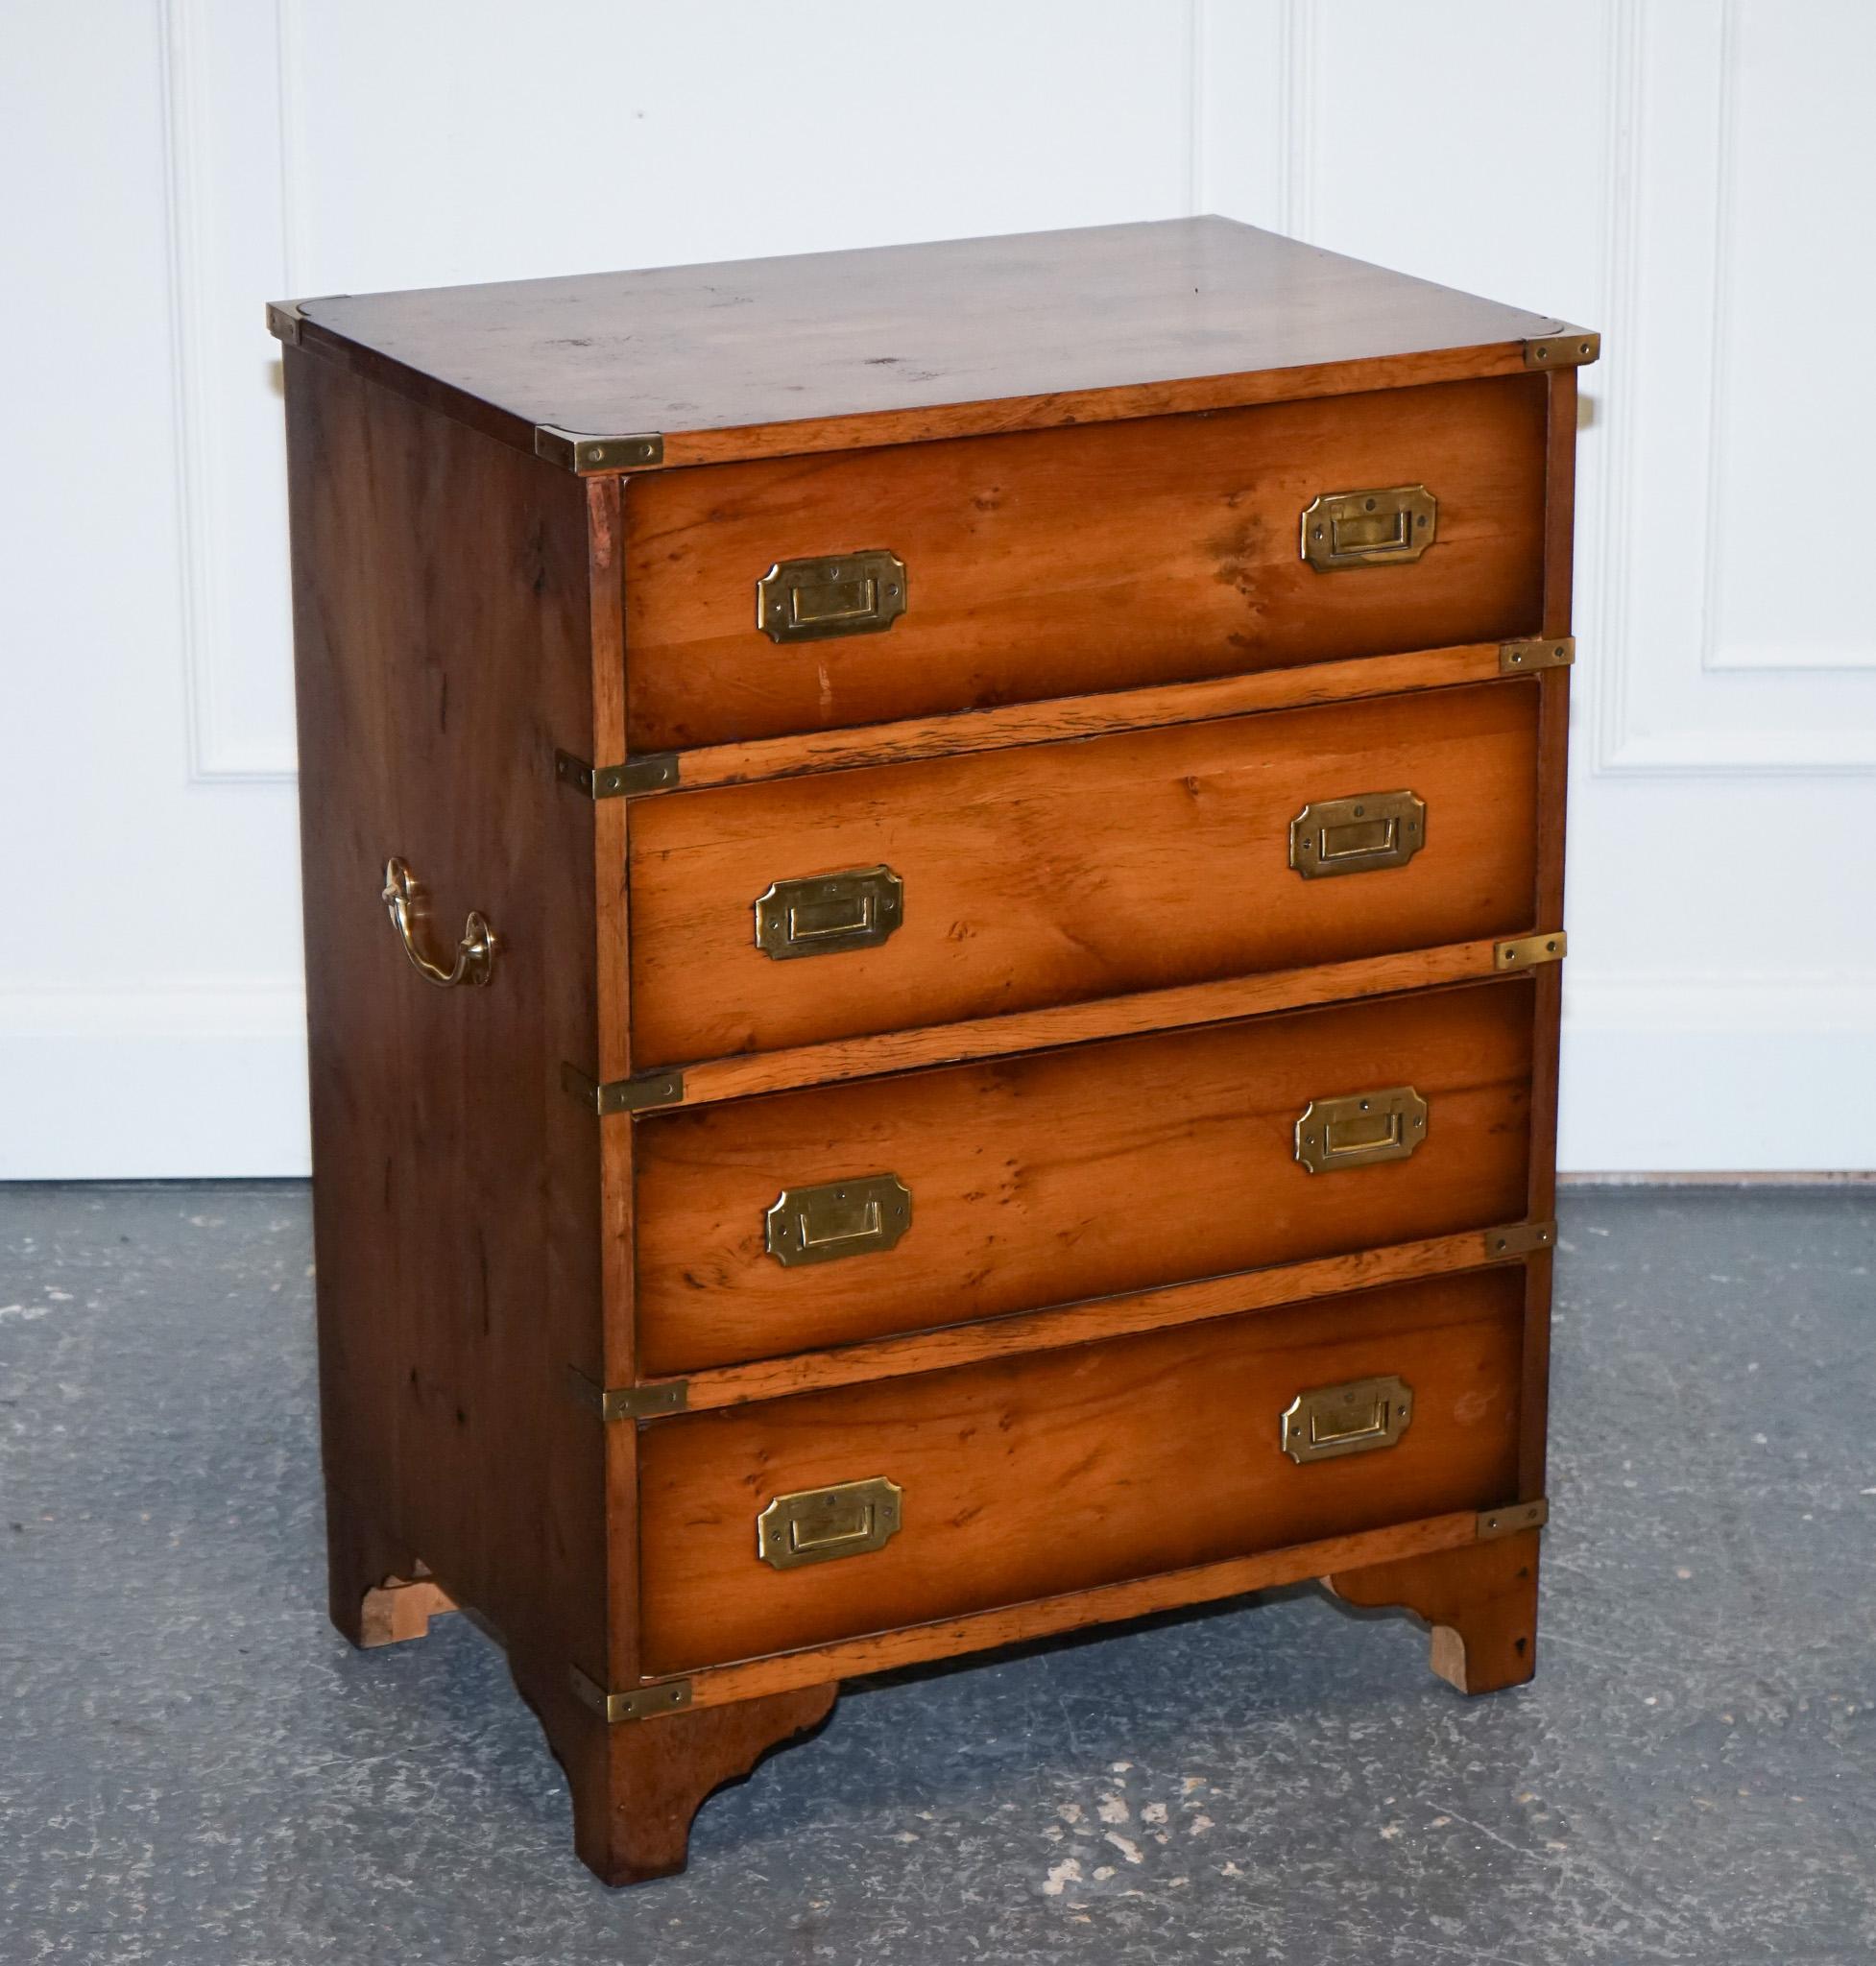 British Vintage Burr Yew Wood Chest of Drawers with Brass Handles